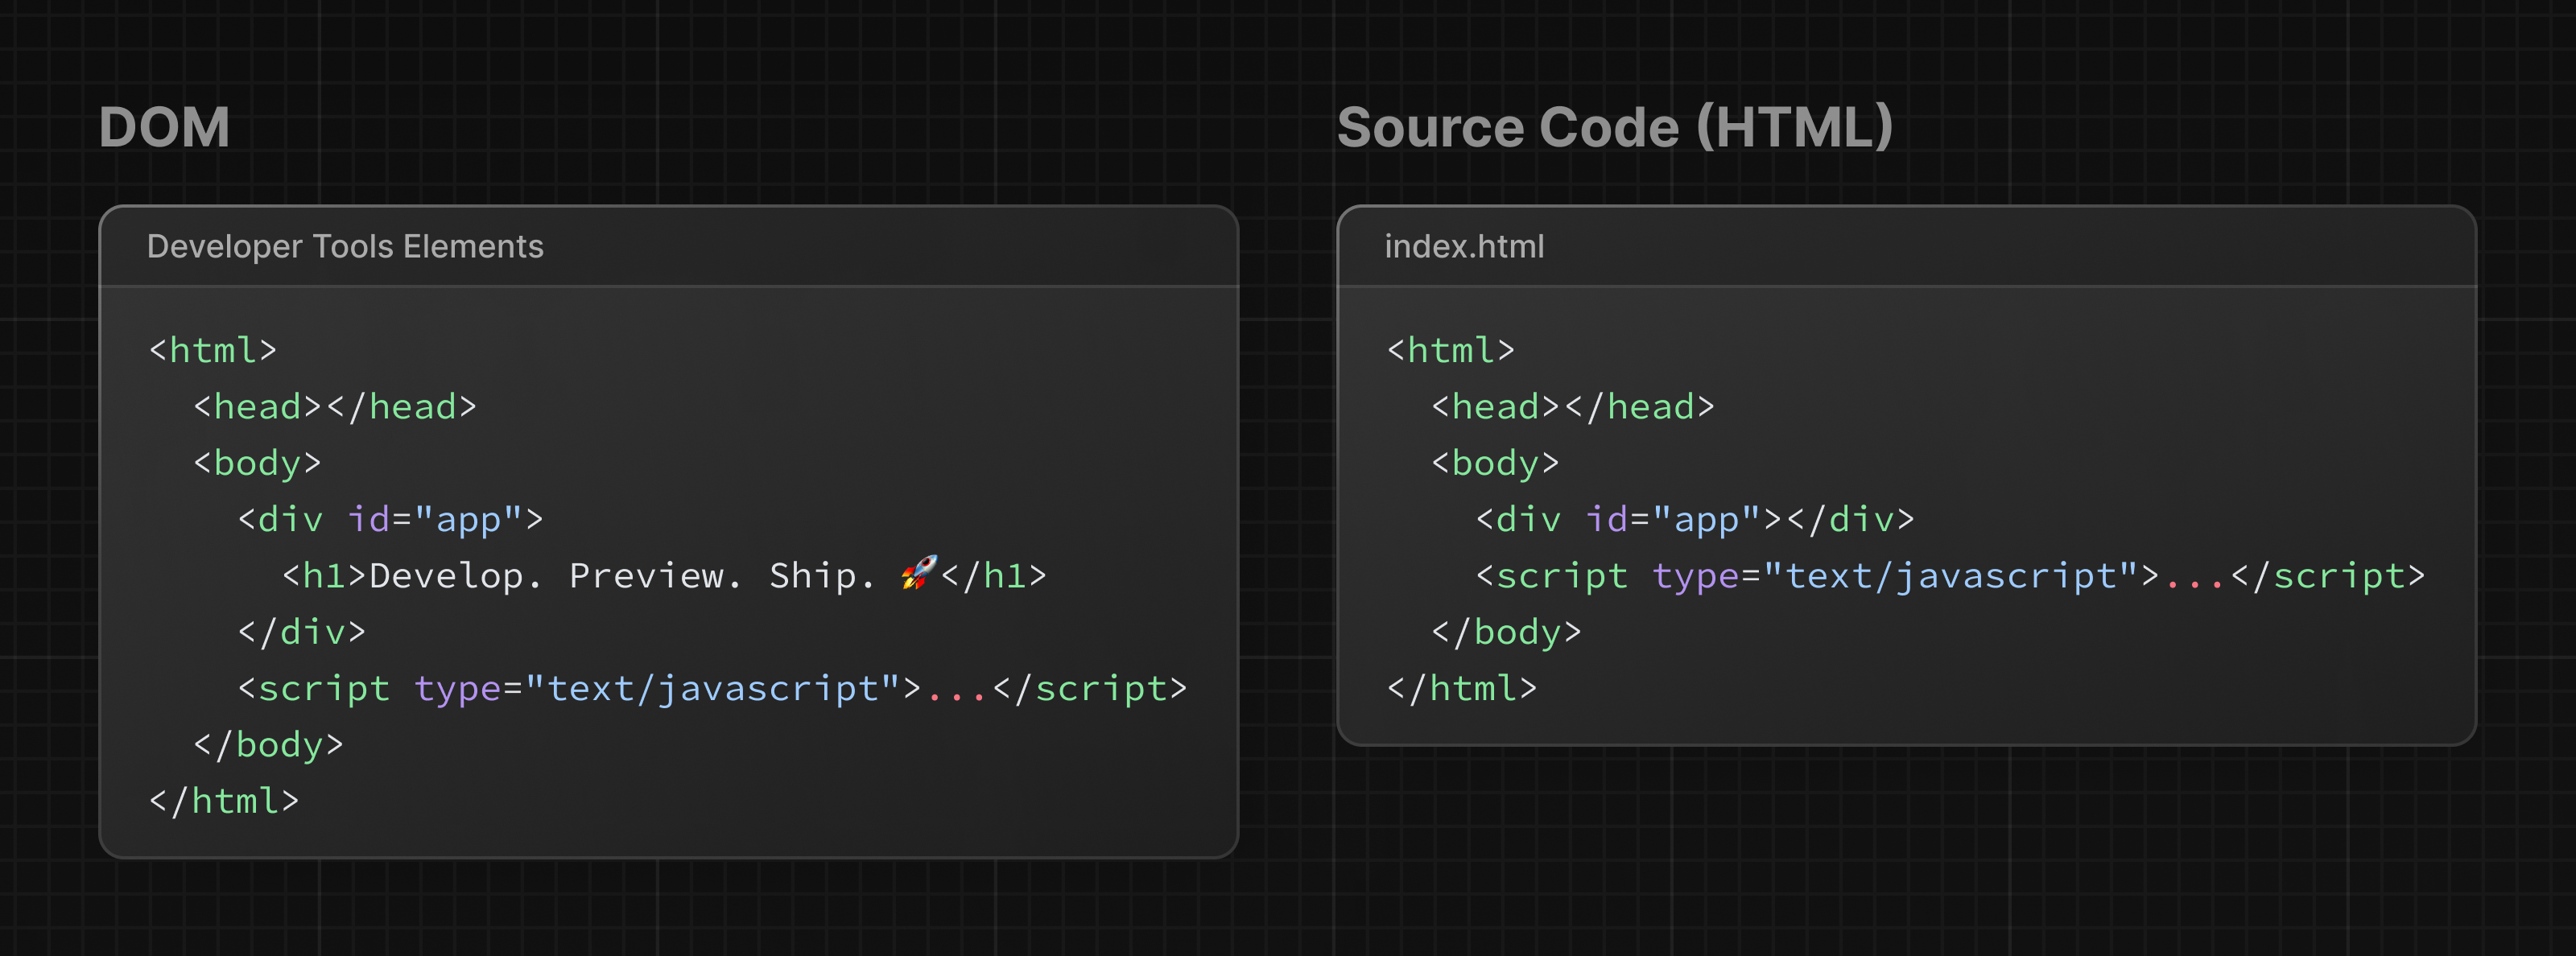 Two side-by-side diagrams showing the differences between the rendered DOM elements and Source Code (HTML)